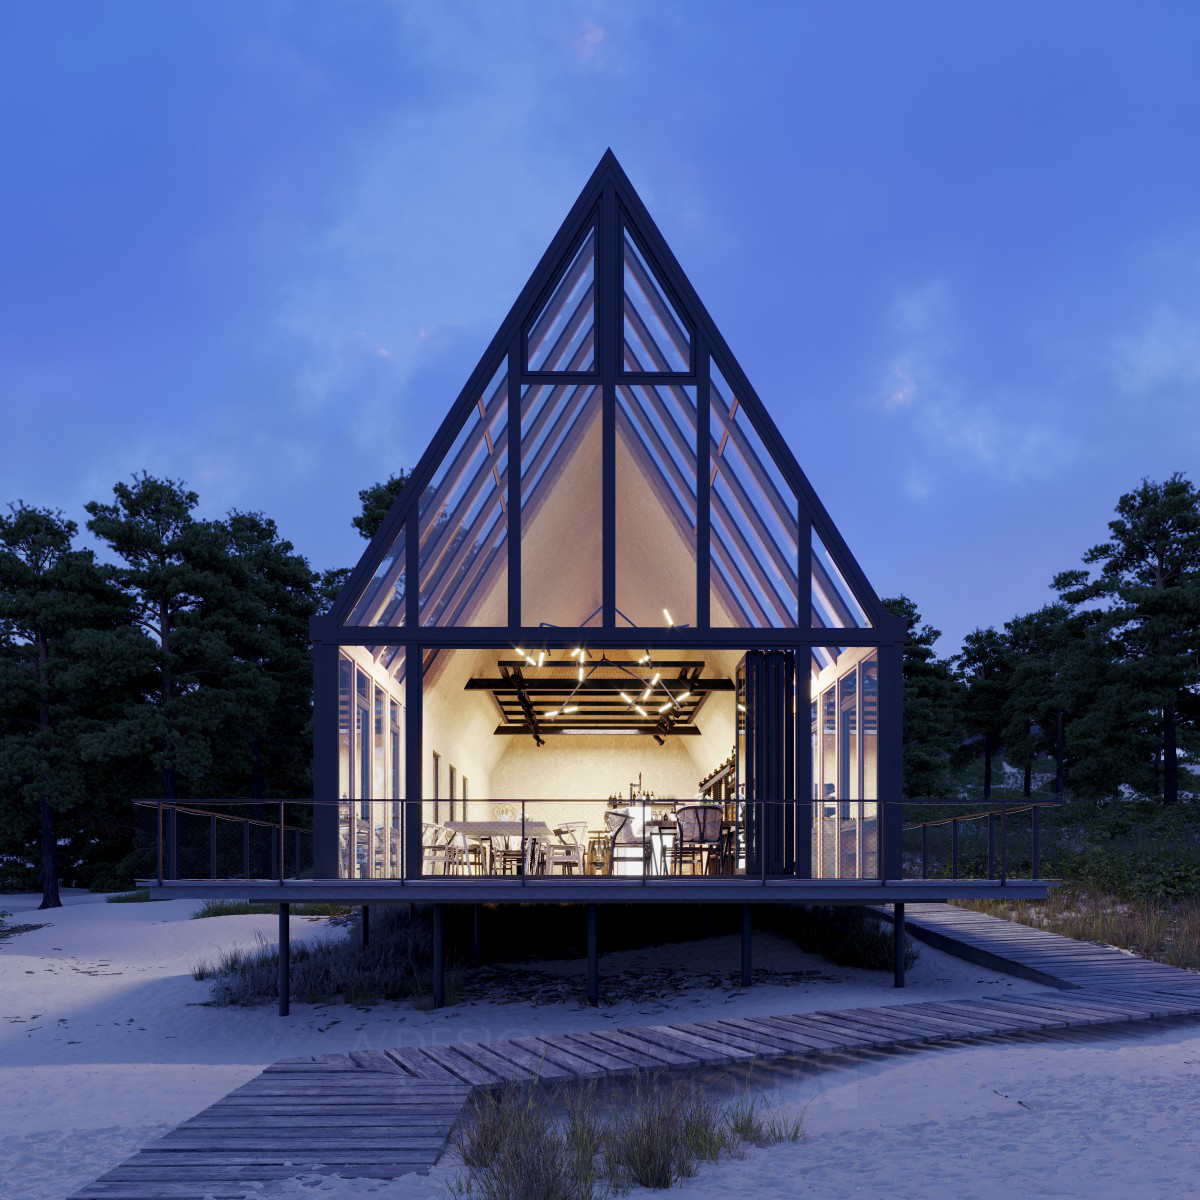 Beach Cabin on the Baltic Sea Hospitality by Peter Kuczia Golden Architecture, Building and Structure Design Award Winner 2022 